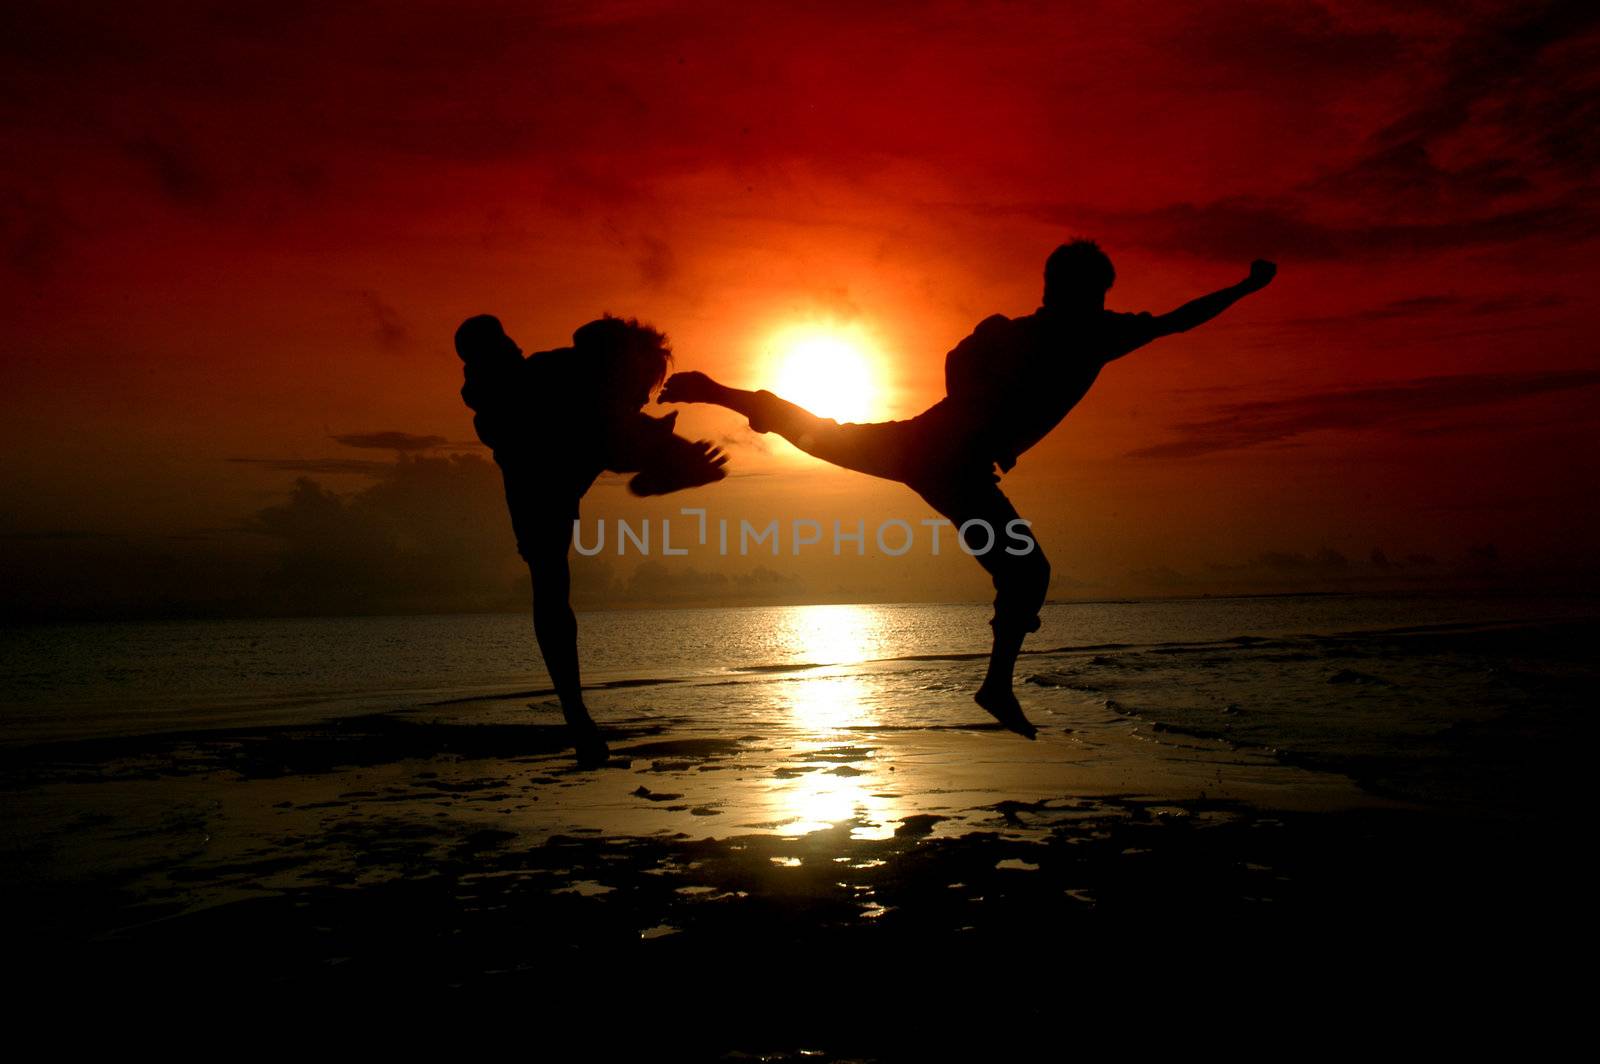 silhouette of two people who are fighting photographed before sunrise